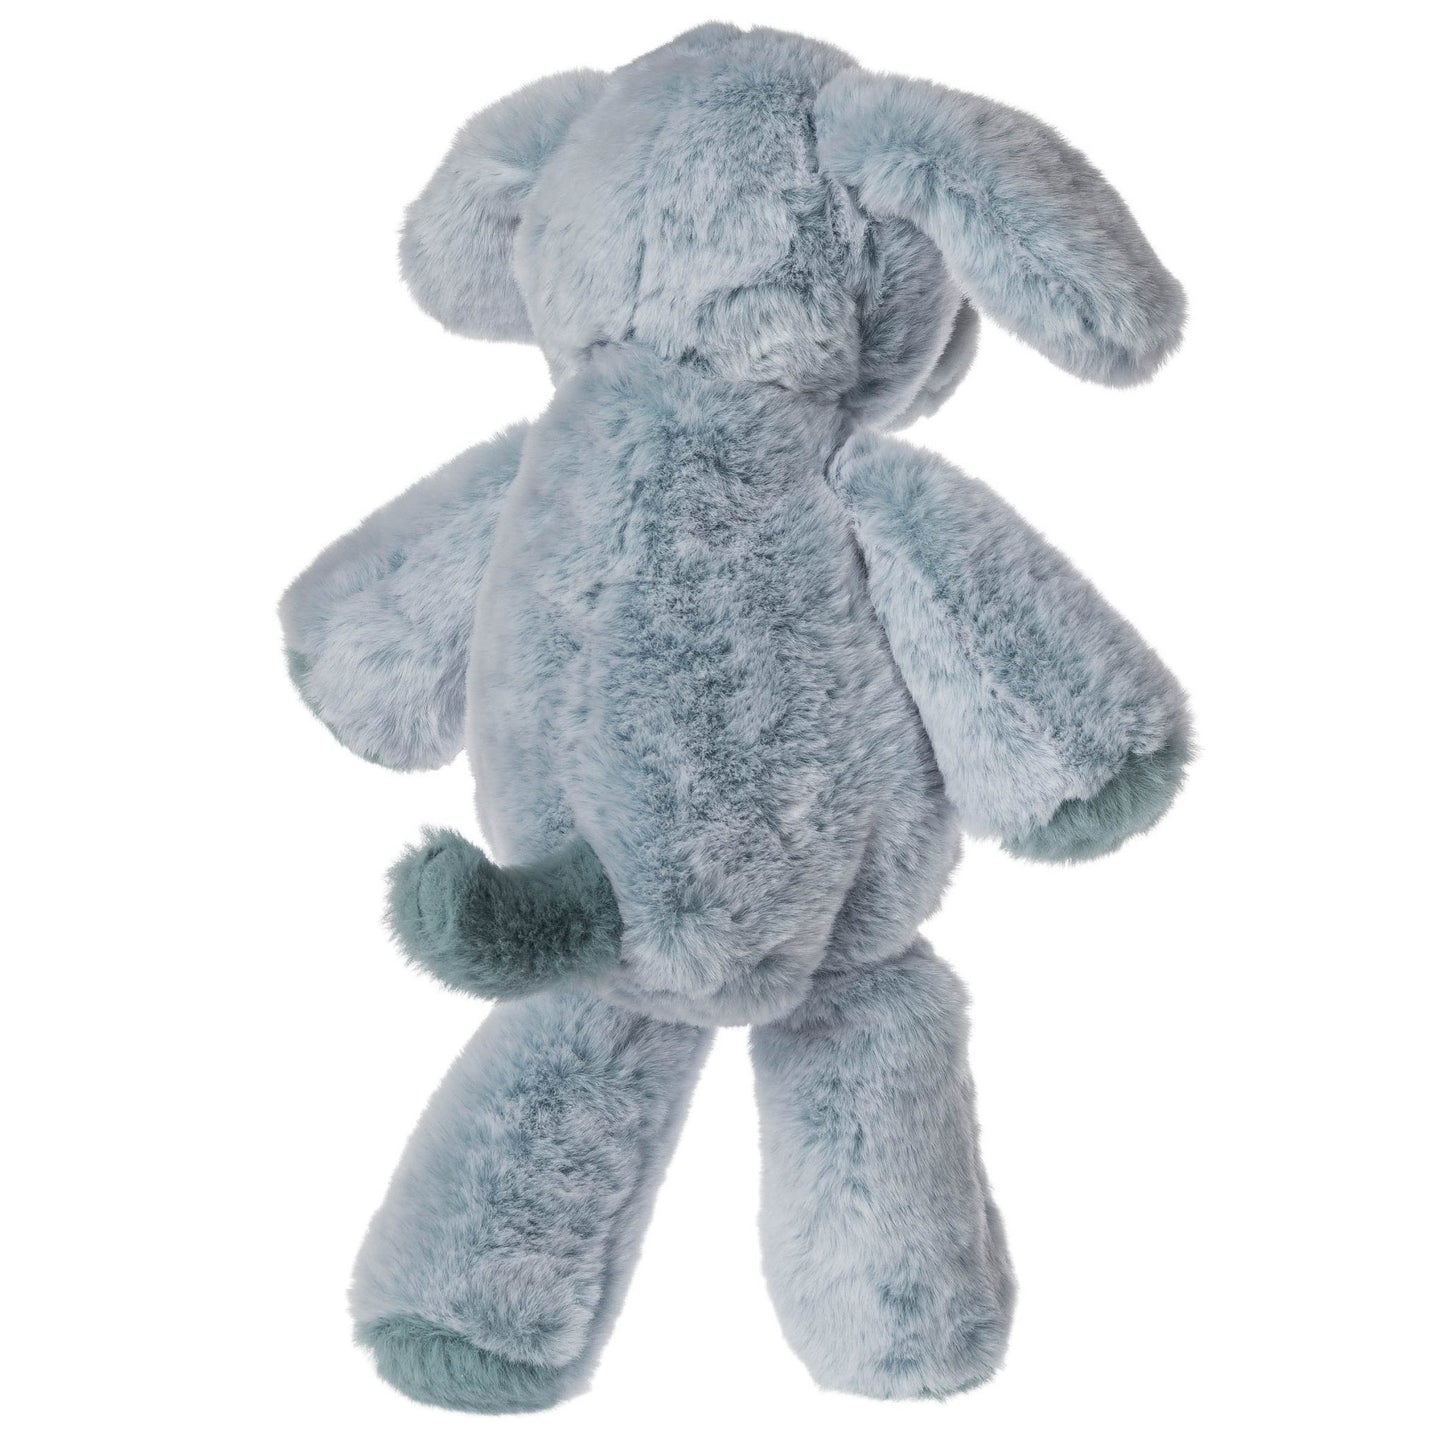 Marshmallow Poochy Pup  - Doodlebug's Children's Boutique